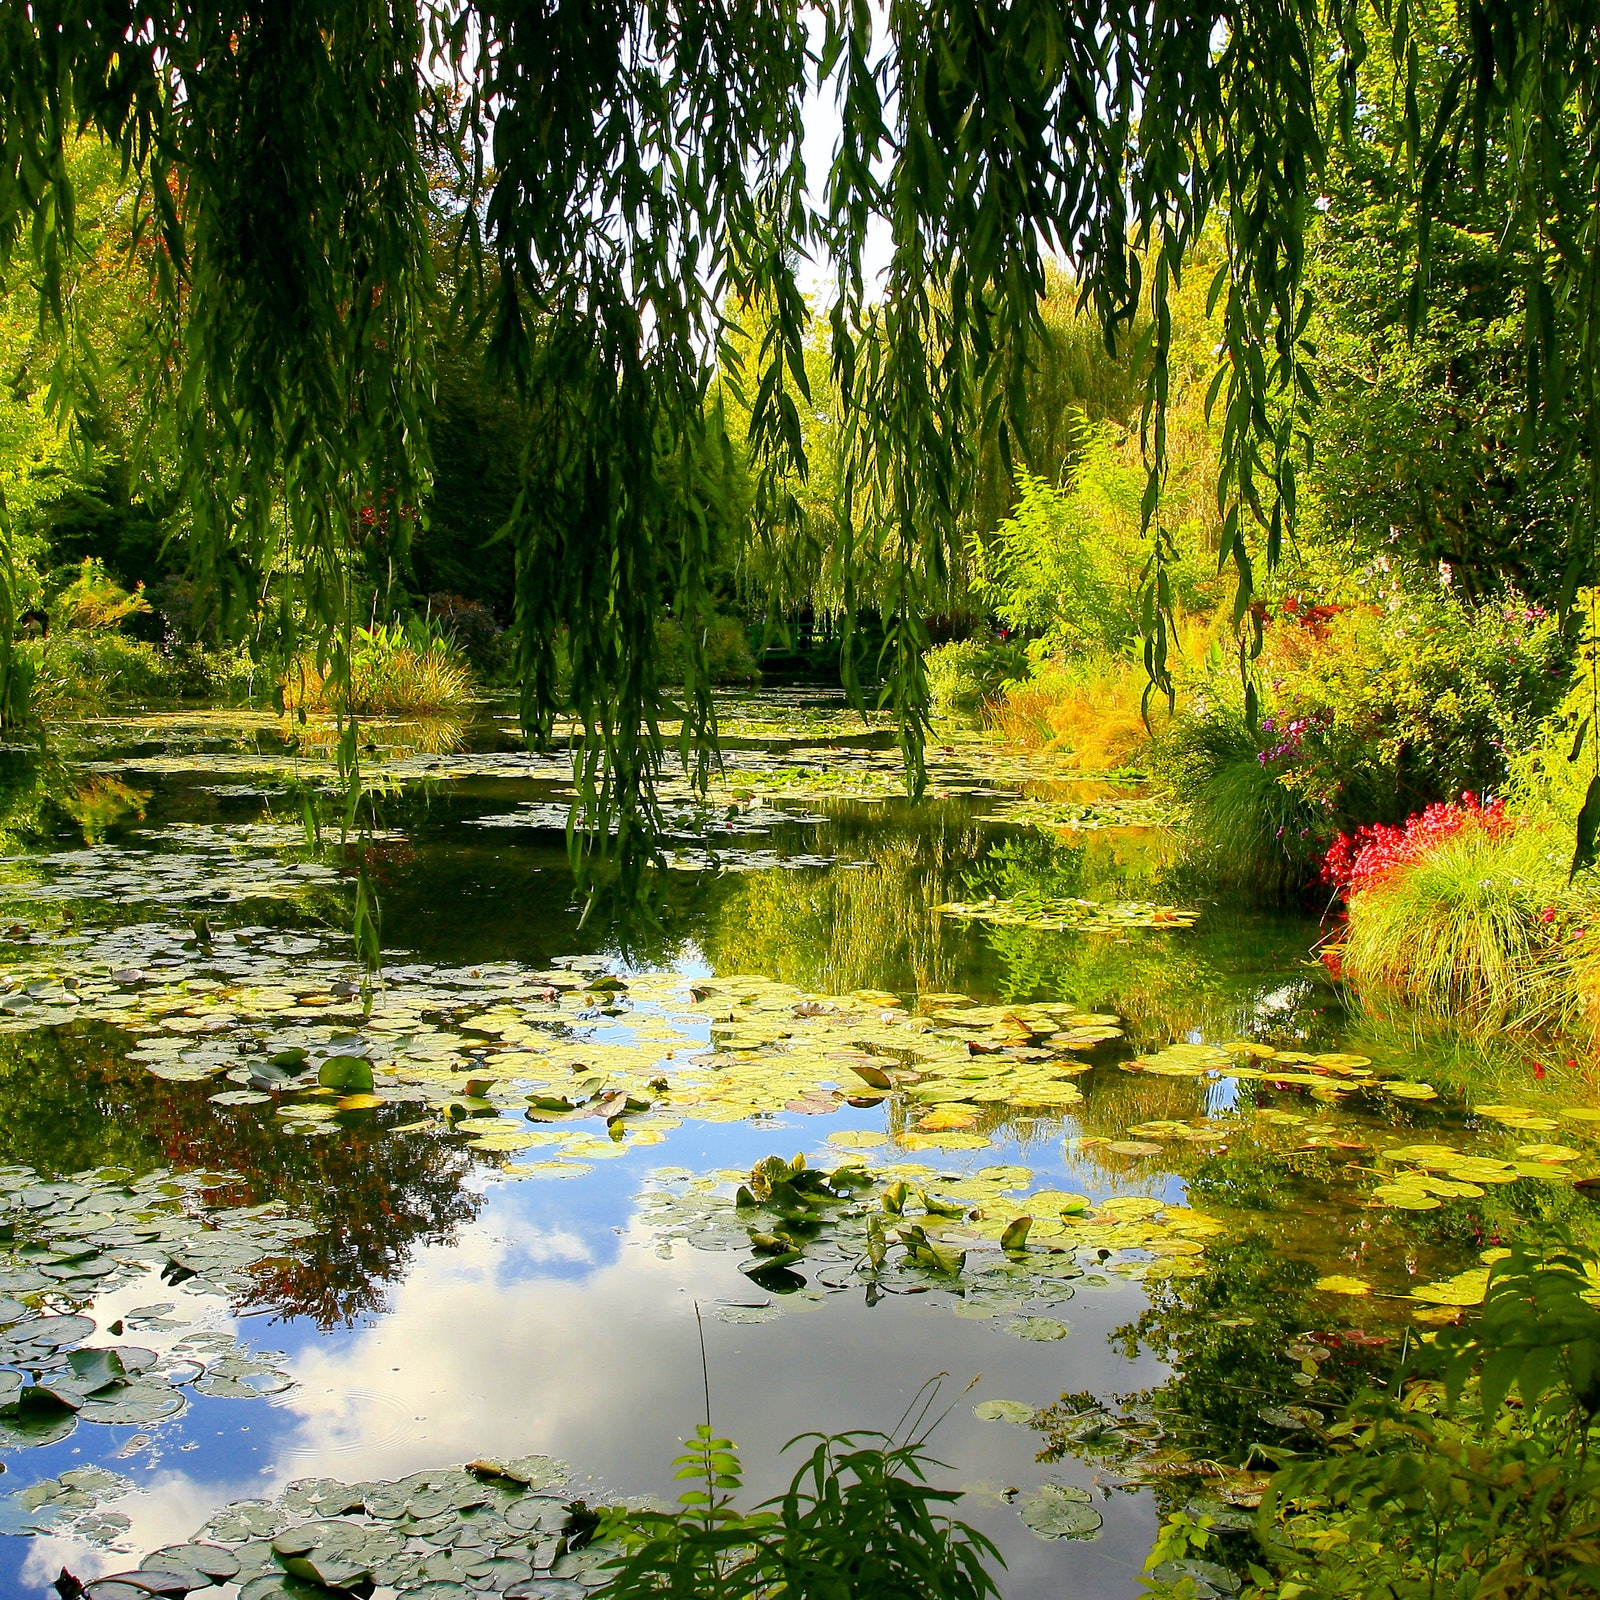 Monet Foundation & Museum of Impressionism in Giverny: Full-Day Audio Guided Tour from Paris in France